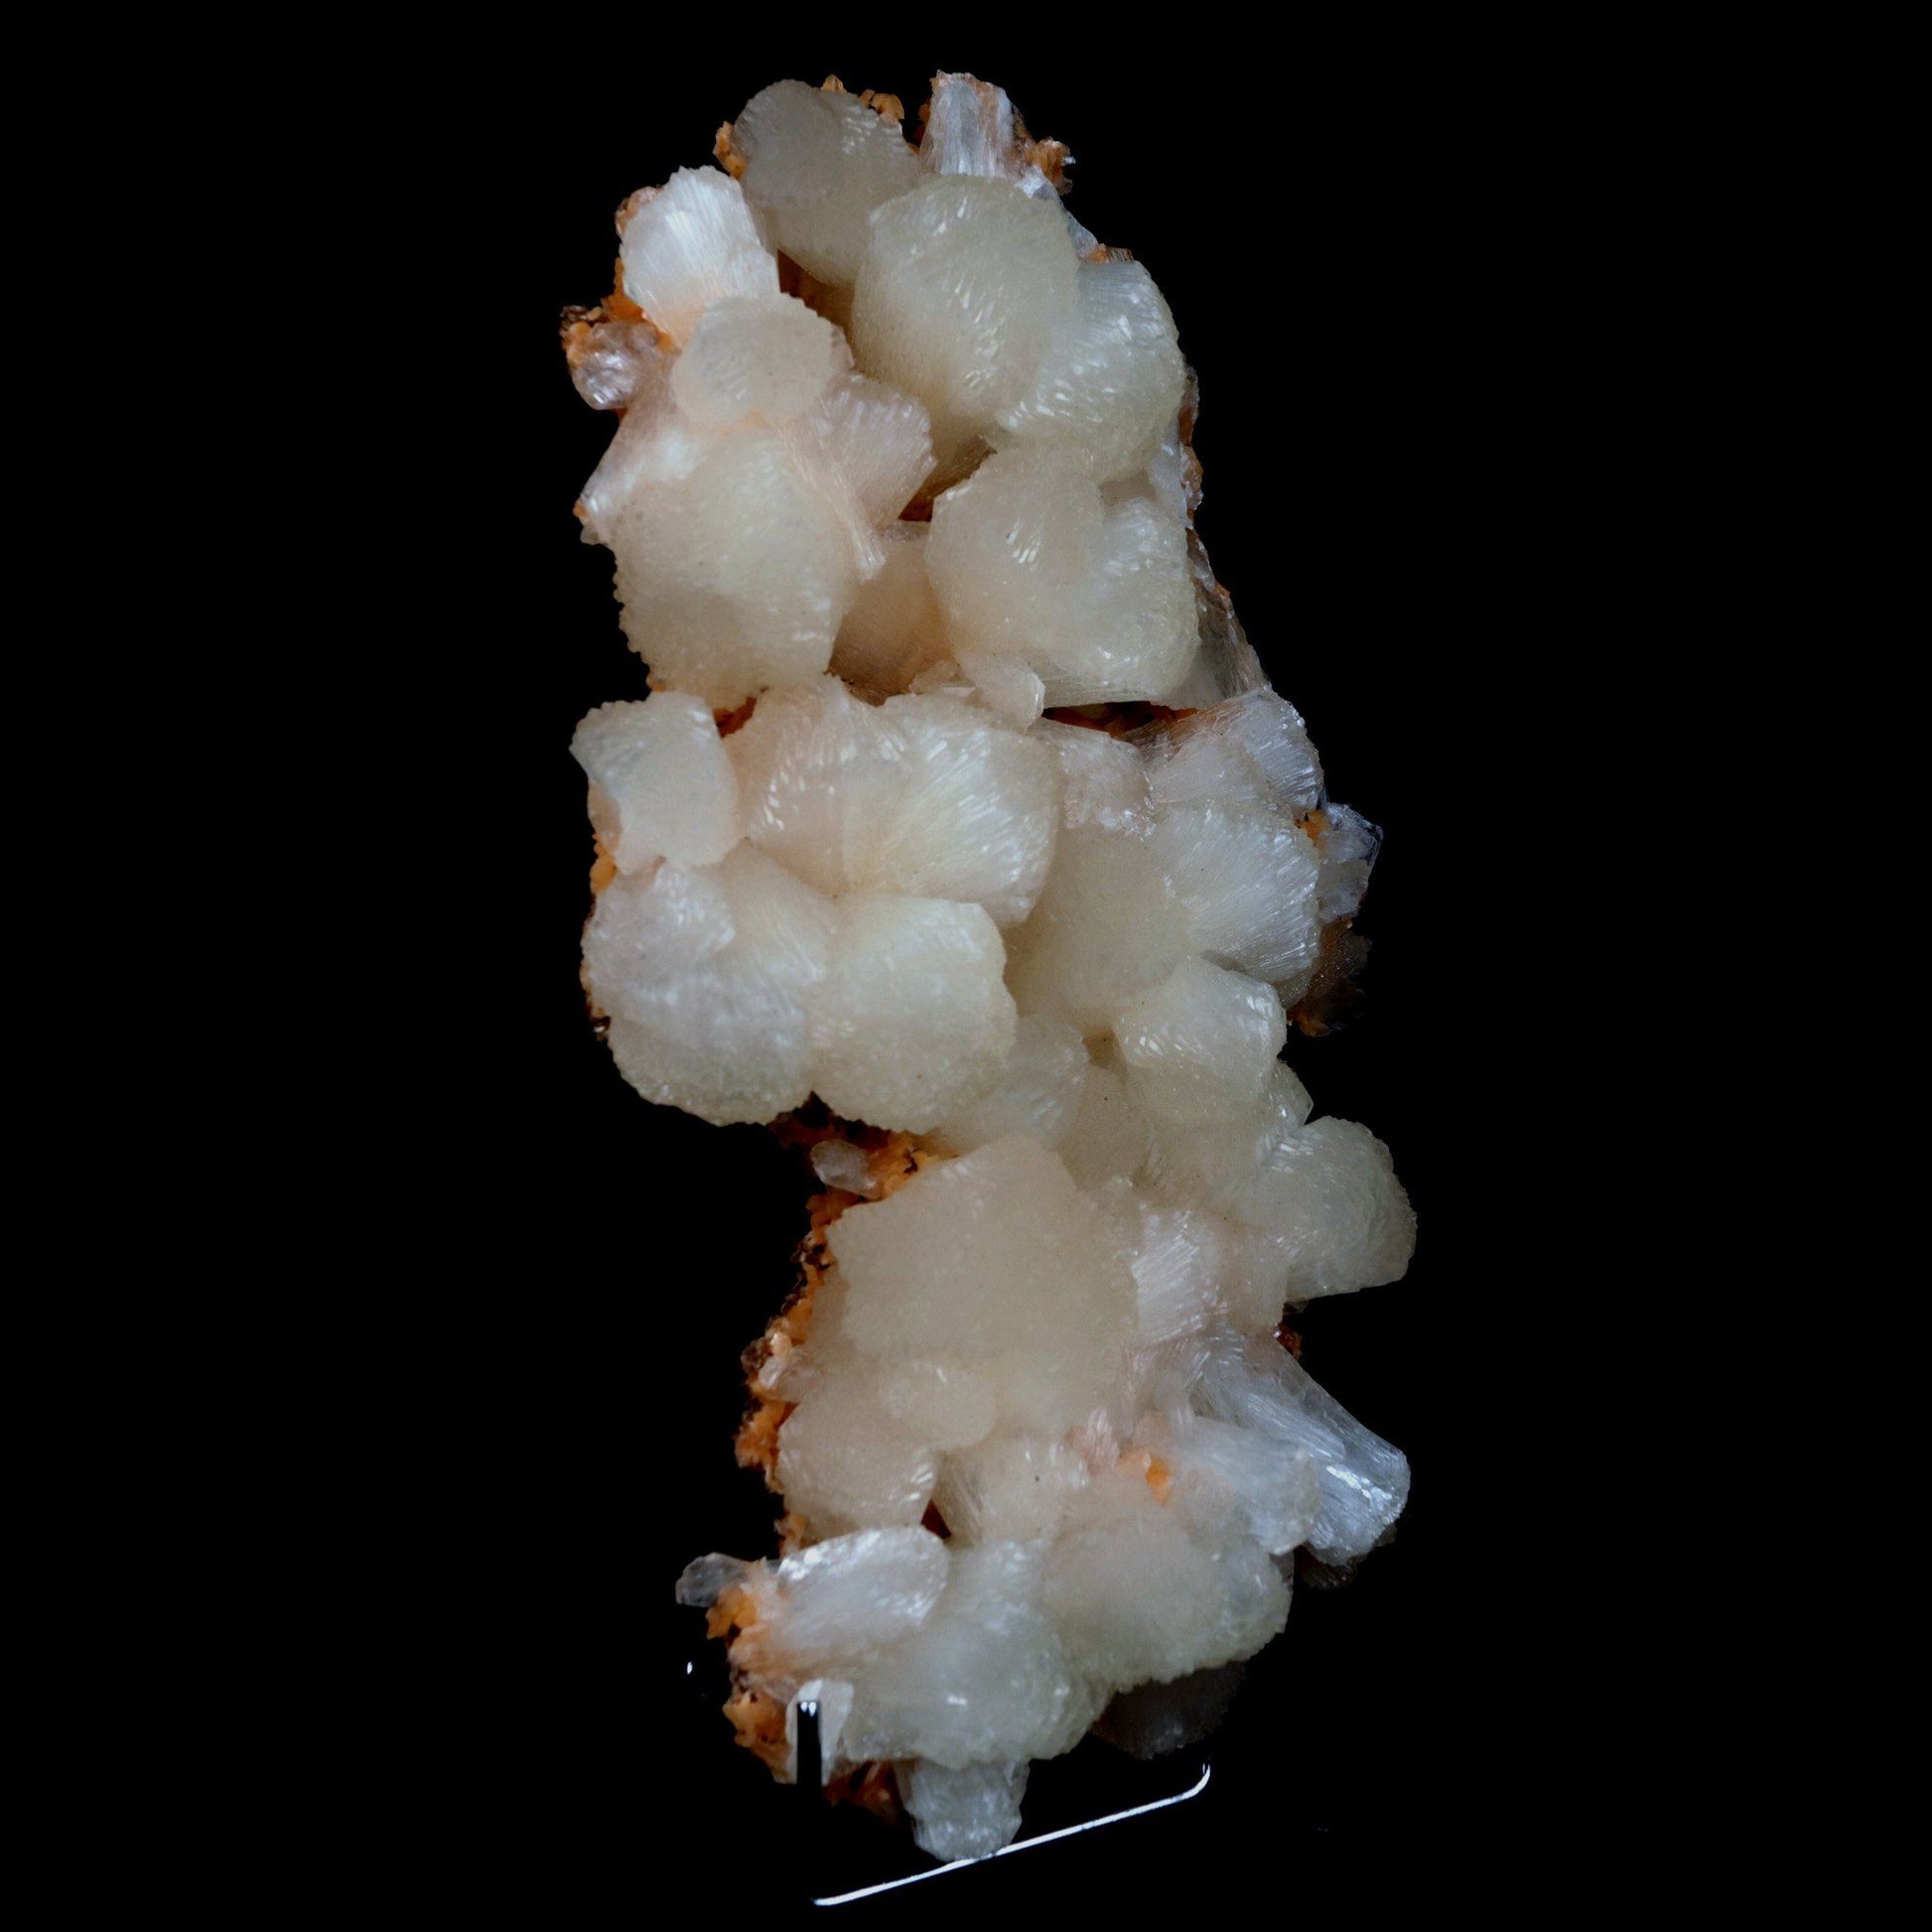 Stilbite on Heulandite Natural Mineral Specimen # B 4729  https://www.superbminerals.us/products/stilbite-on-heulandite-natural-mineral-specimen-b-4729  Features: Featuring many excellent quality bladed groups of Stilbite in a soft white hue, resting over pearly stalactitic formations of peach colored Heulandite, this piece is a stunning example of the material. The sculpture is really flashy and three-dimensional, and I particularly like how the Stilbites